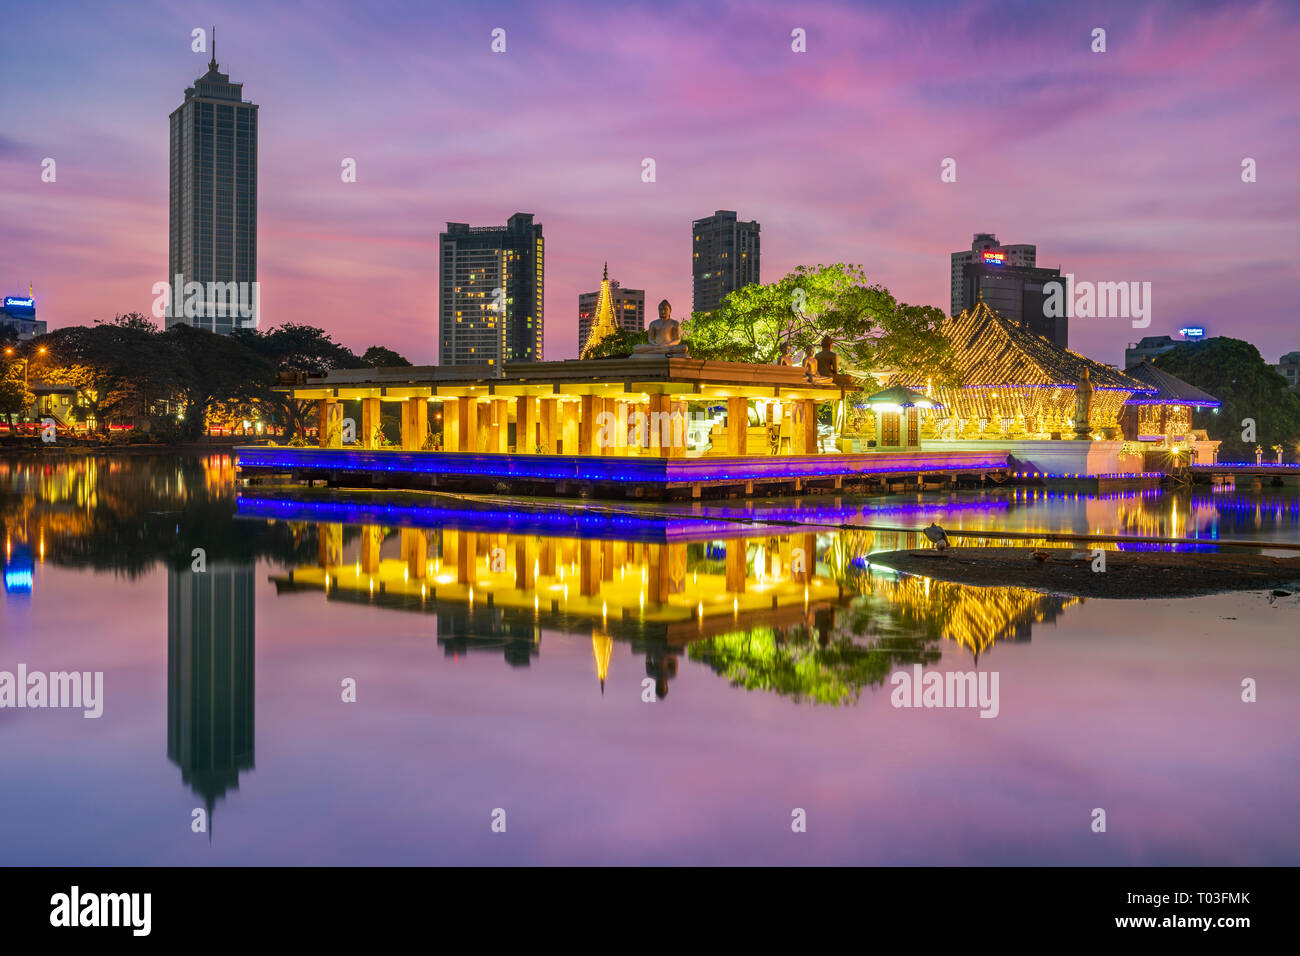 The Seema Malakaya Buddhist Temple sits on an island in Beira Lake at the heart of Colombo, Sri Lanka.  Designed by Geoffrey Bawa, the temple and medi Stock Photo